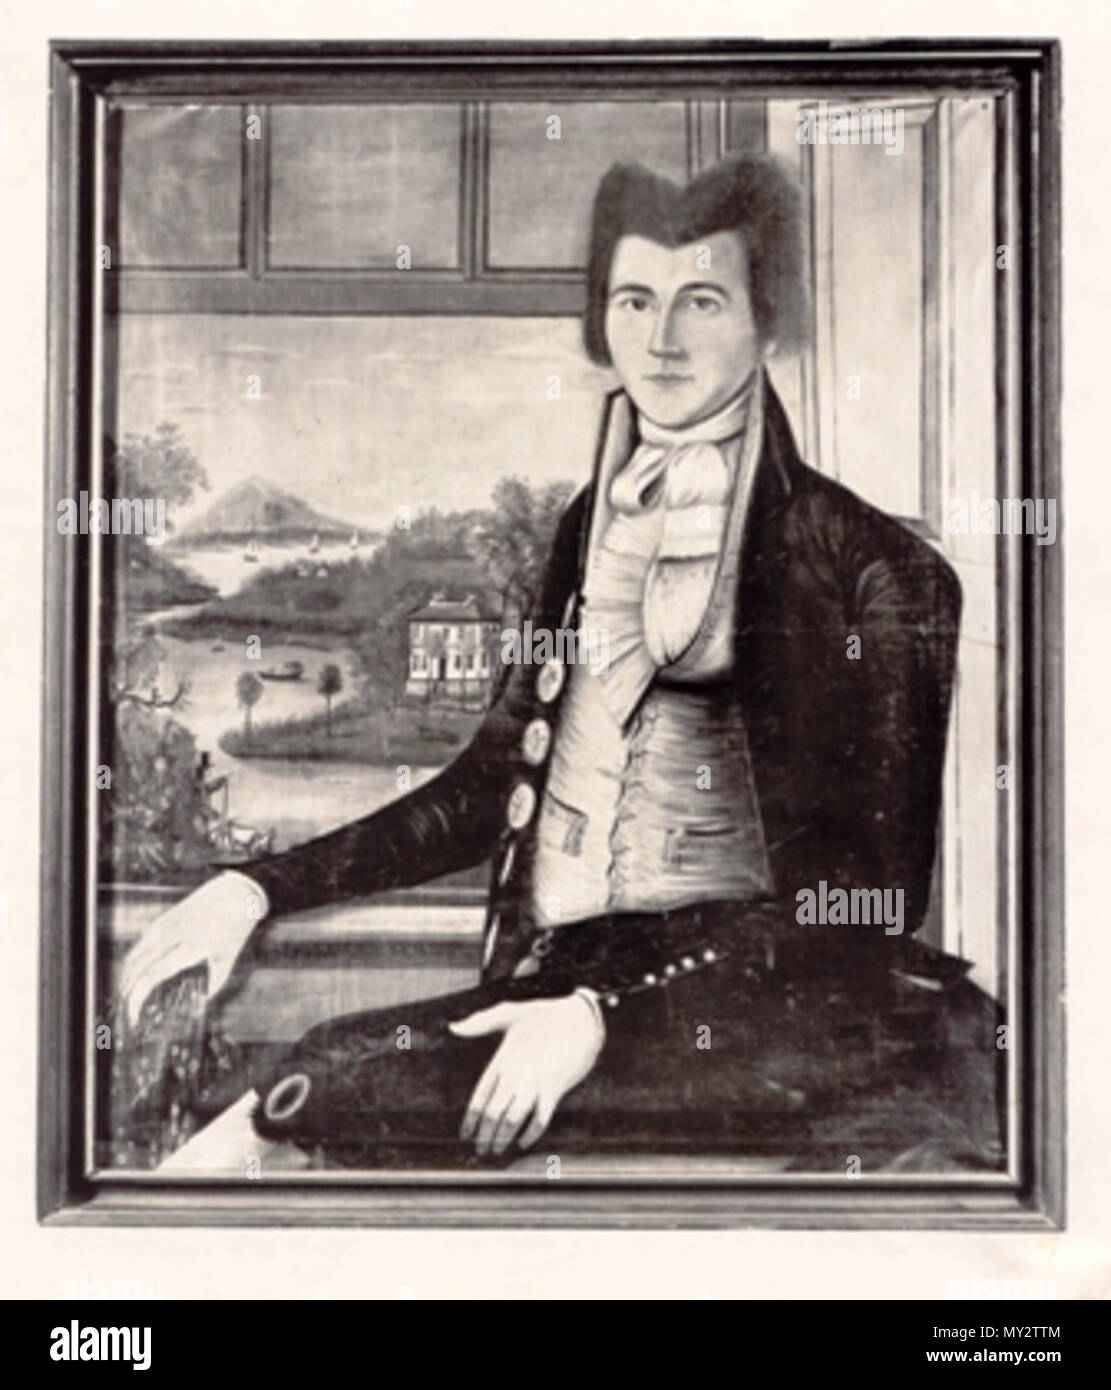 . English: Portrait of composer Timothy Swan (1758-1843), sometime resident of Suffield, Connecticut. Swan was born in Worcester, Mass., and apprenticed as a hat maker. He later briefly attended singing school, and learned to play the flute in 1776 as a member of the Continental Army. Swan is well-known for the hymns he composed. Unknown date (subject died in 1843). Unknown 529 Timothy Swan composer Stock Photo